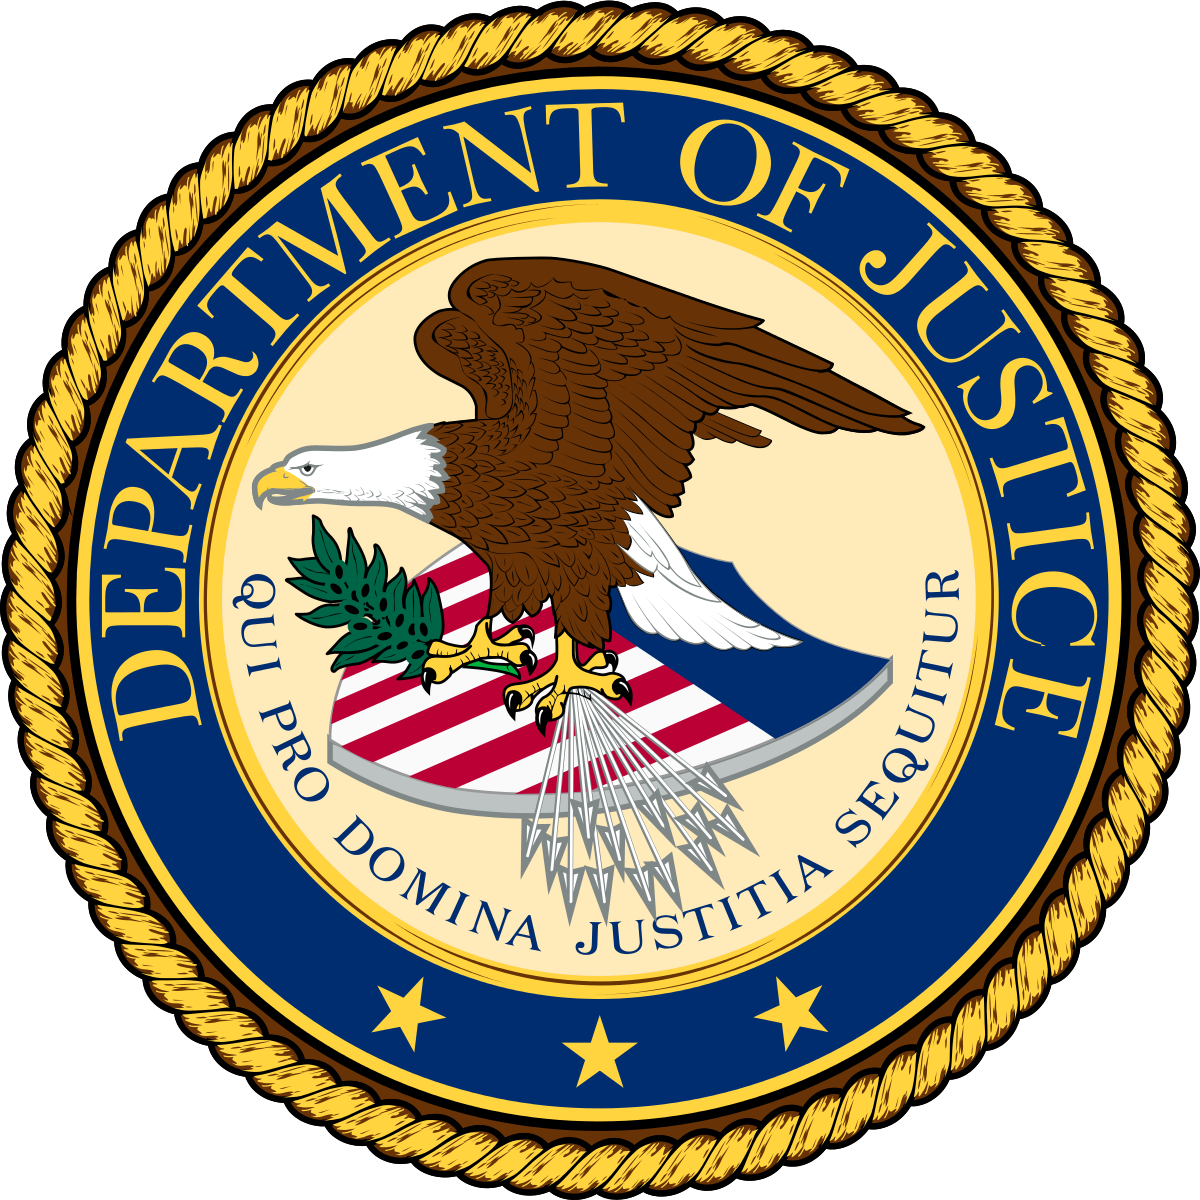 Seal of the United States Department of Justice; an eagle flying with an American flag on a yellow background